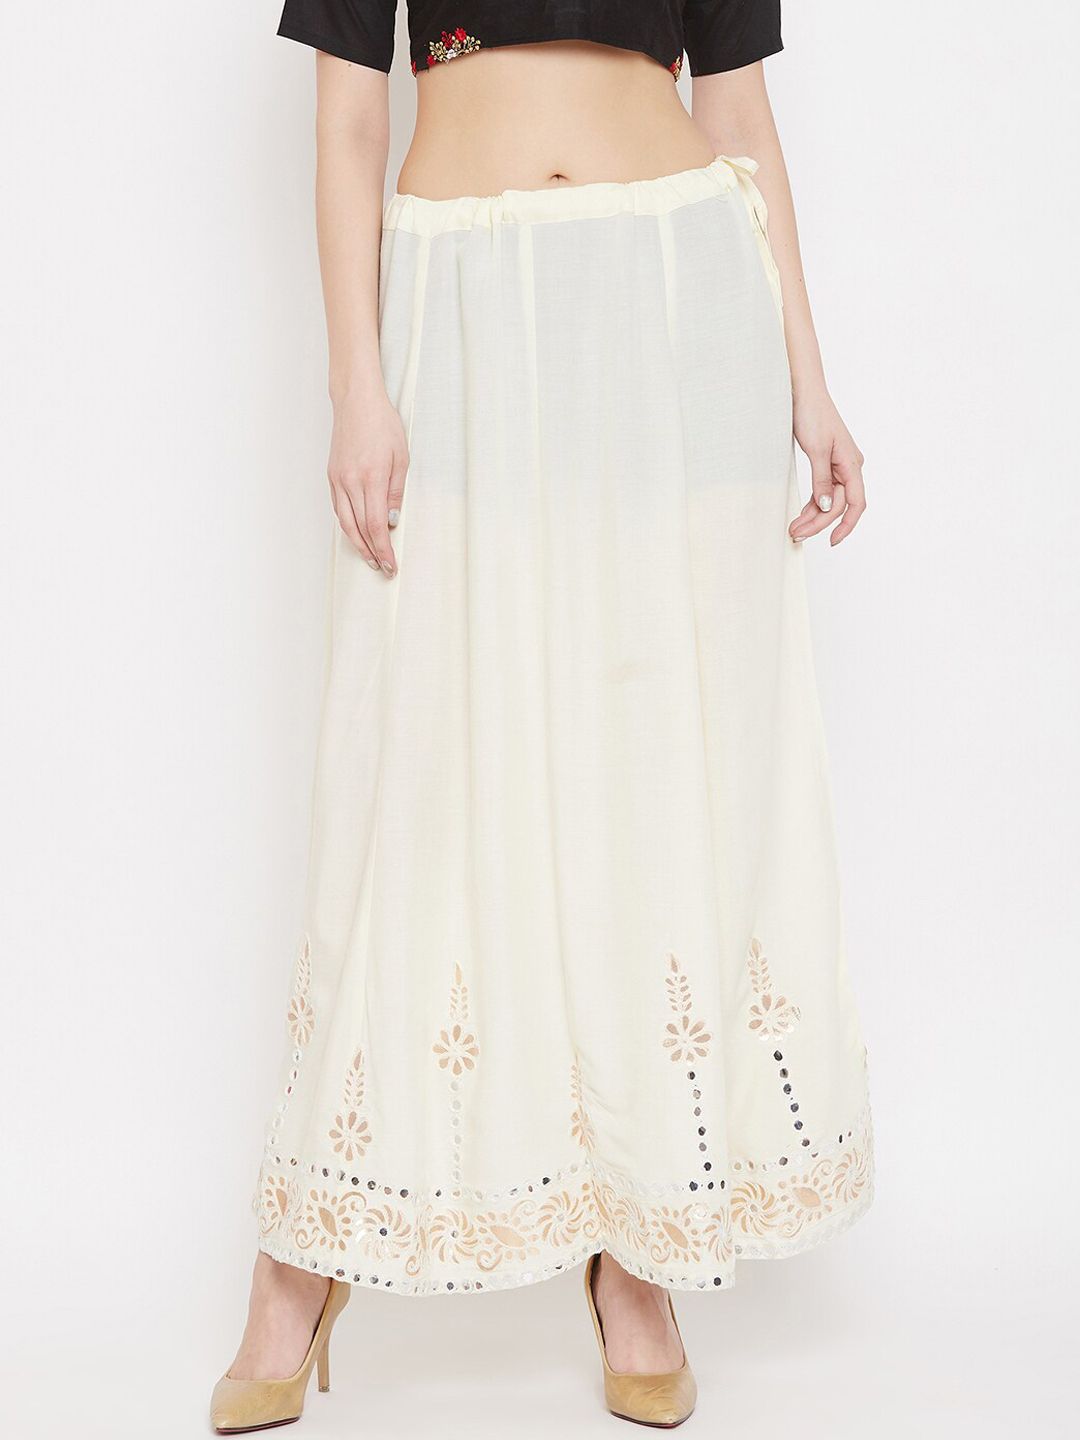 Clora Creation Embellished Flared Maxi Skirt Price in India